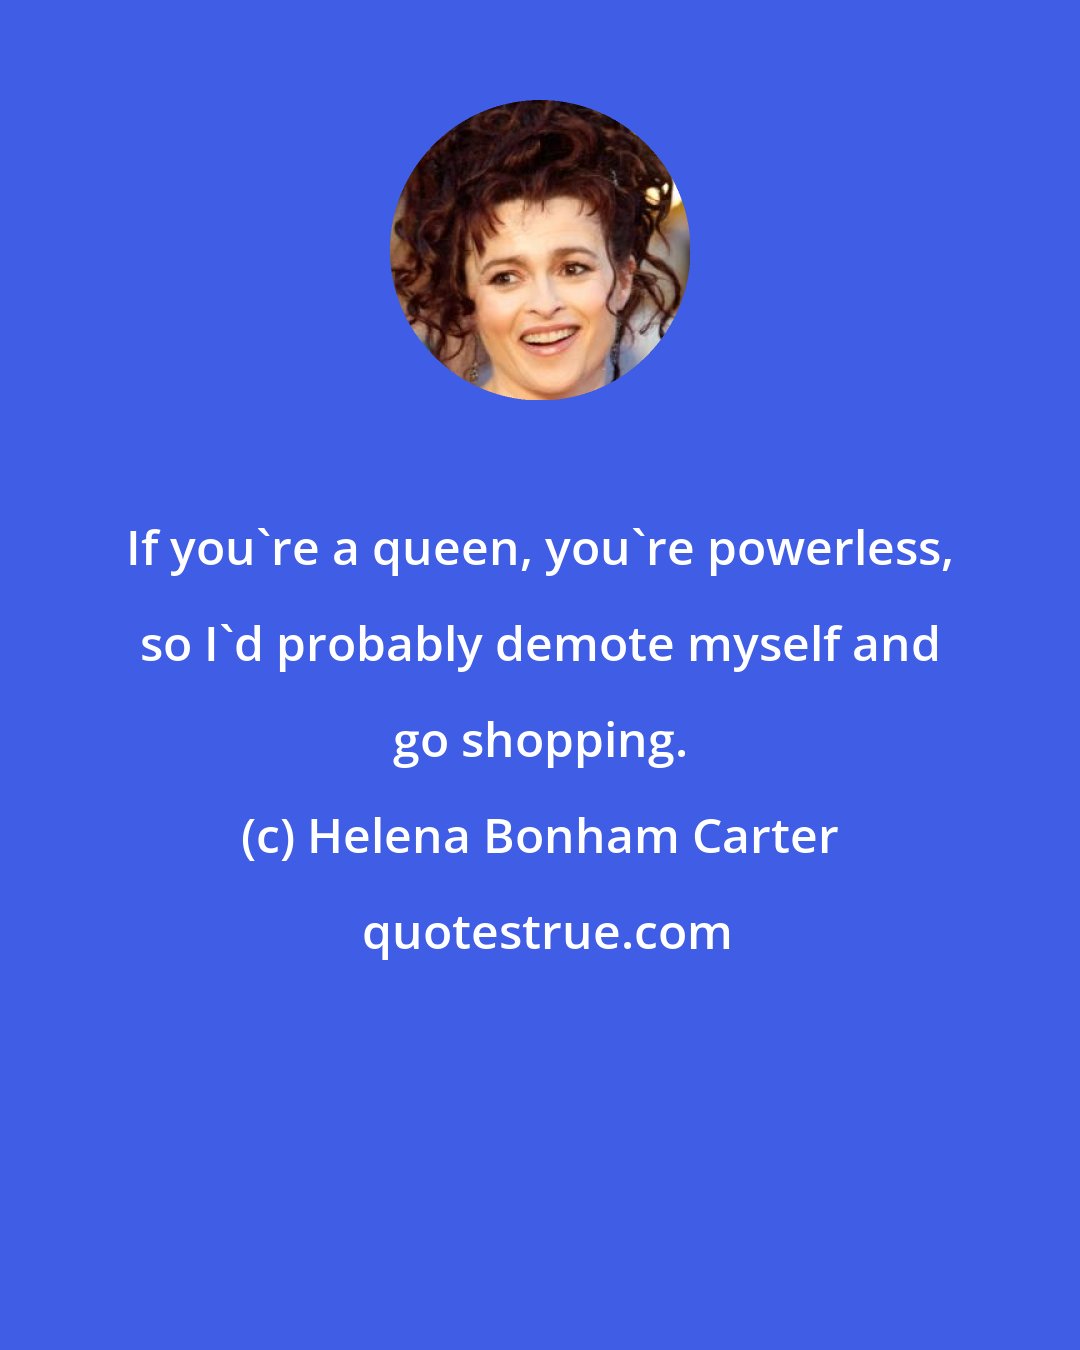 Helena Bonham Carter: If you're a queen, you're powerless, so I'd probably demote myself and go shopping.